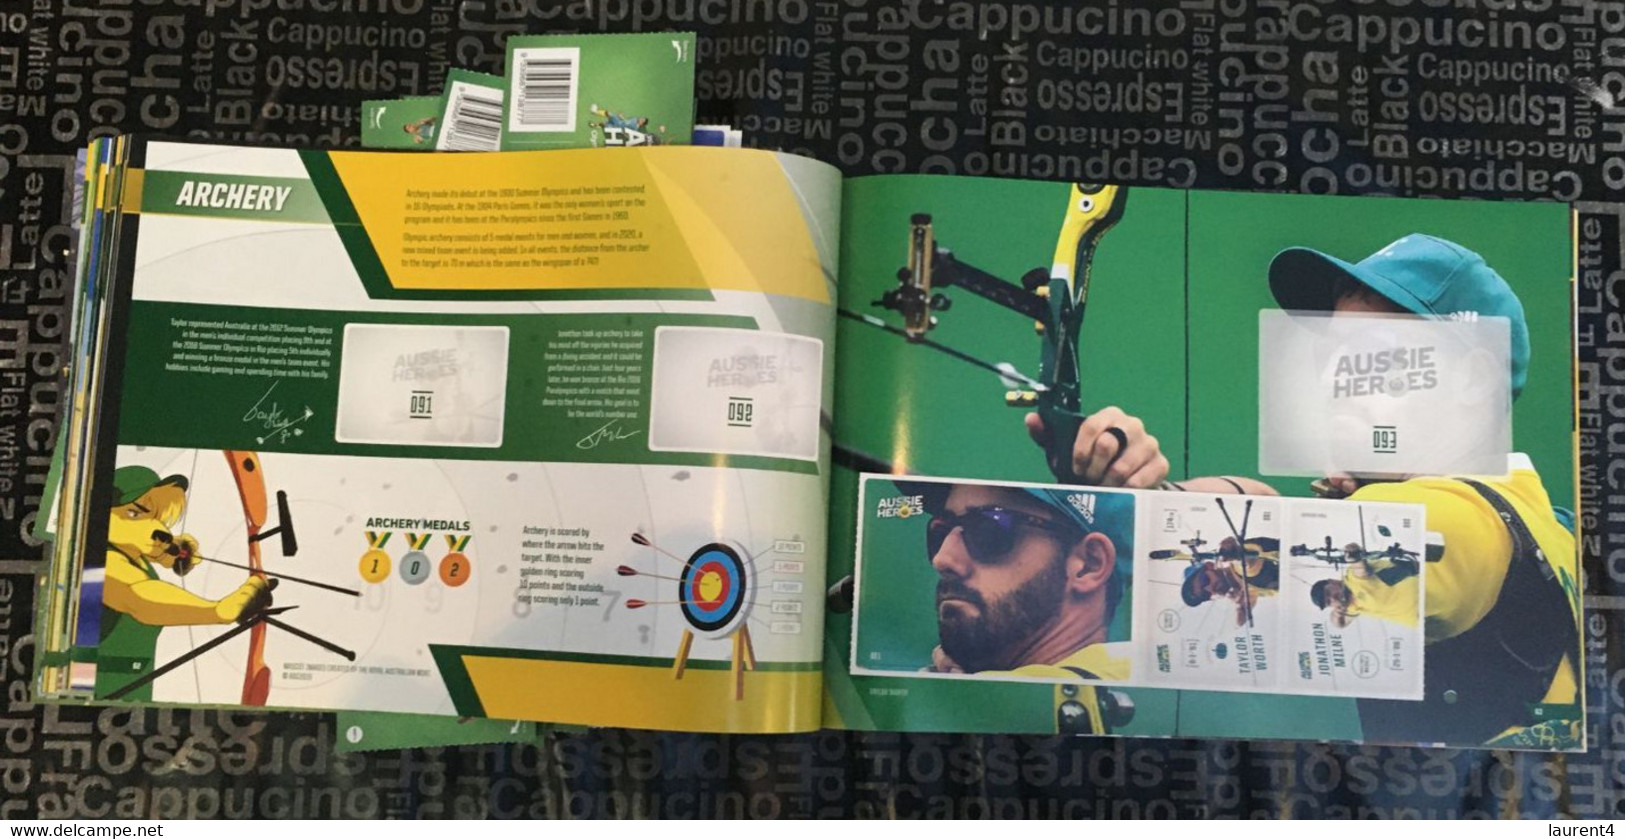 (ZZ 17) Olympic  - Australian Aussie Heroes - Book and stickers from Nº2 to Nº120 rowing - archery - badminton - golf +